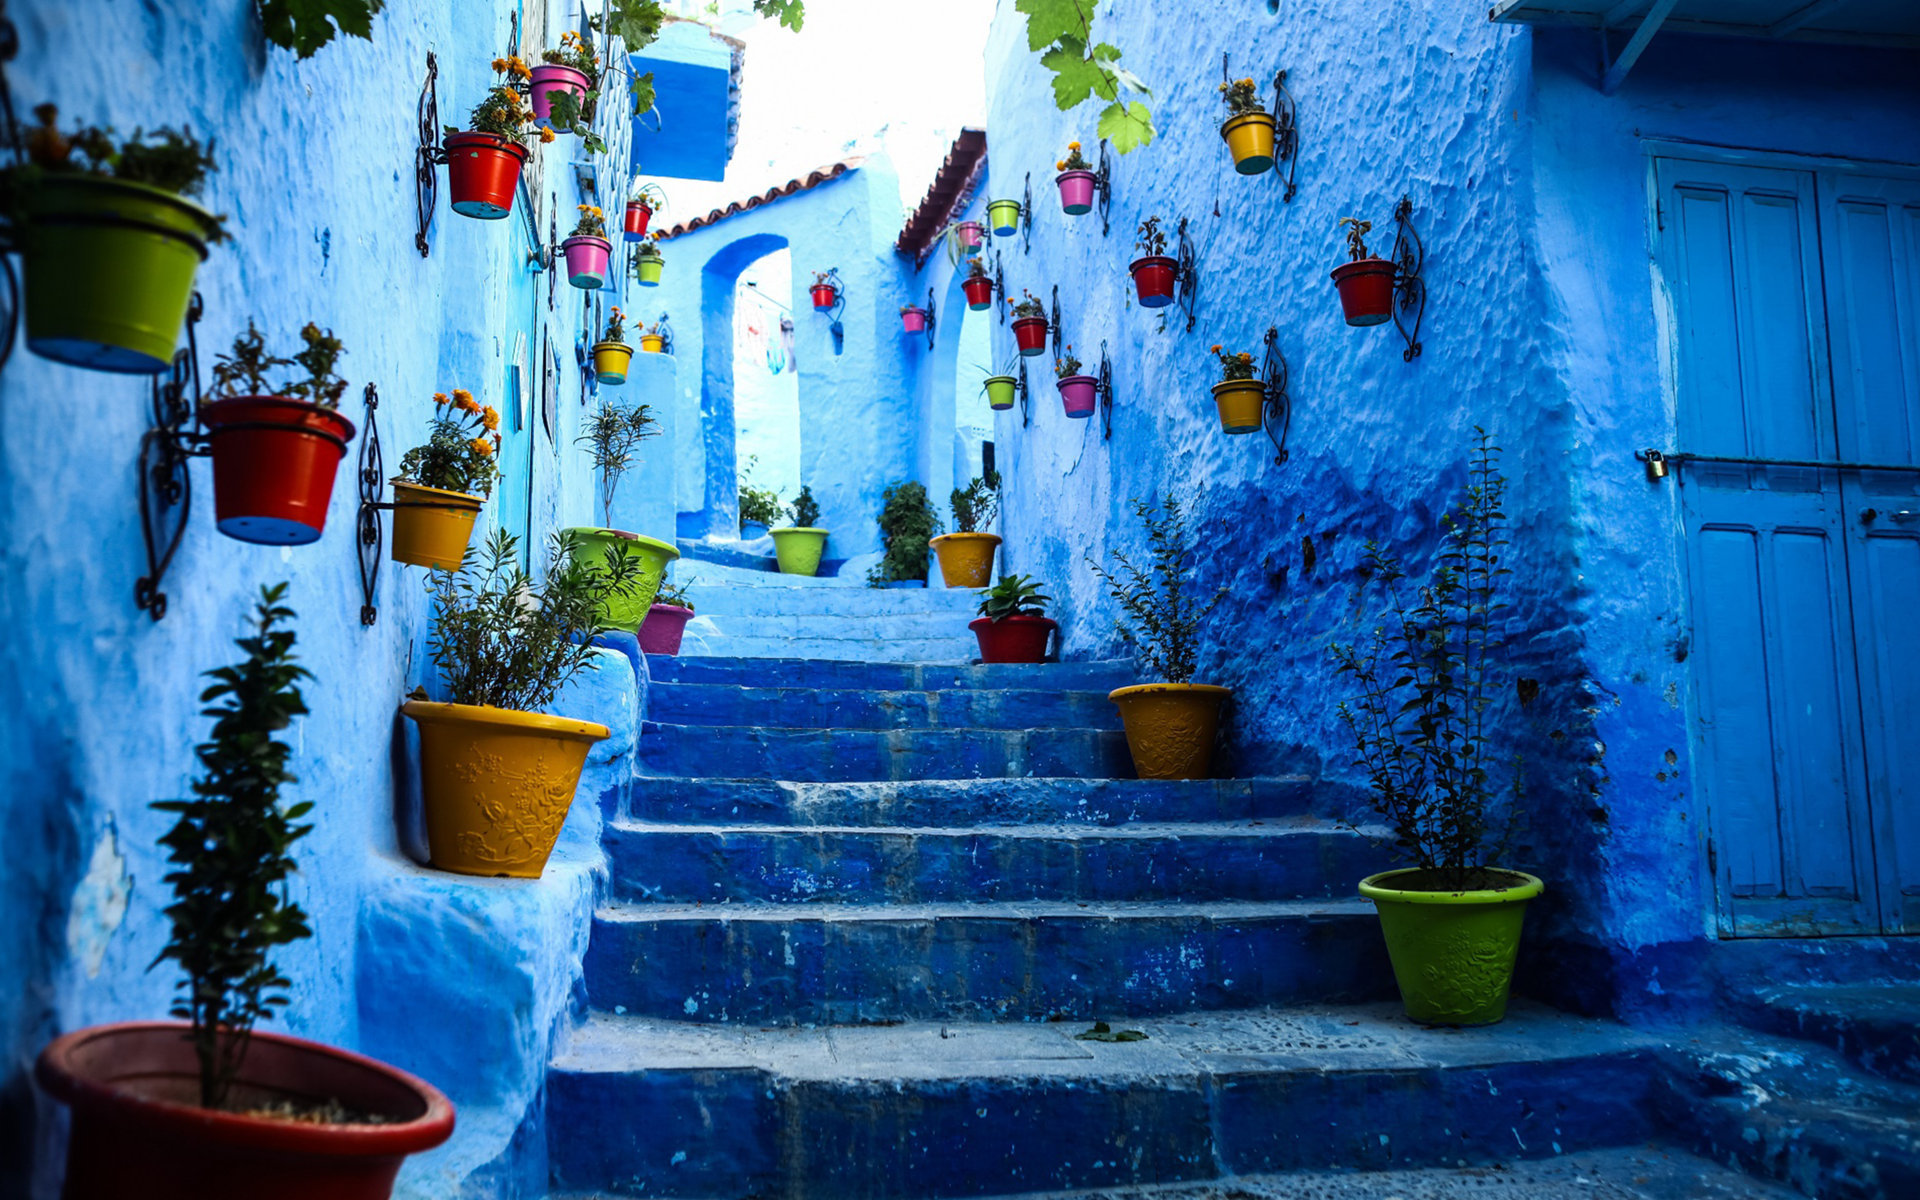 Full day trip from Fes to Chefchaouen (Blue City)